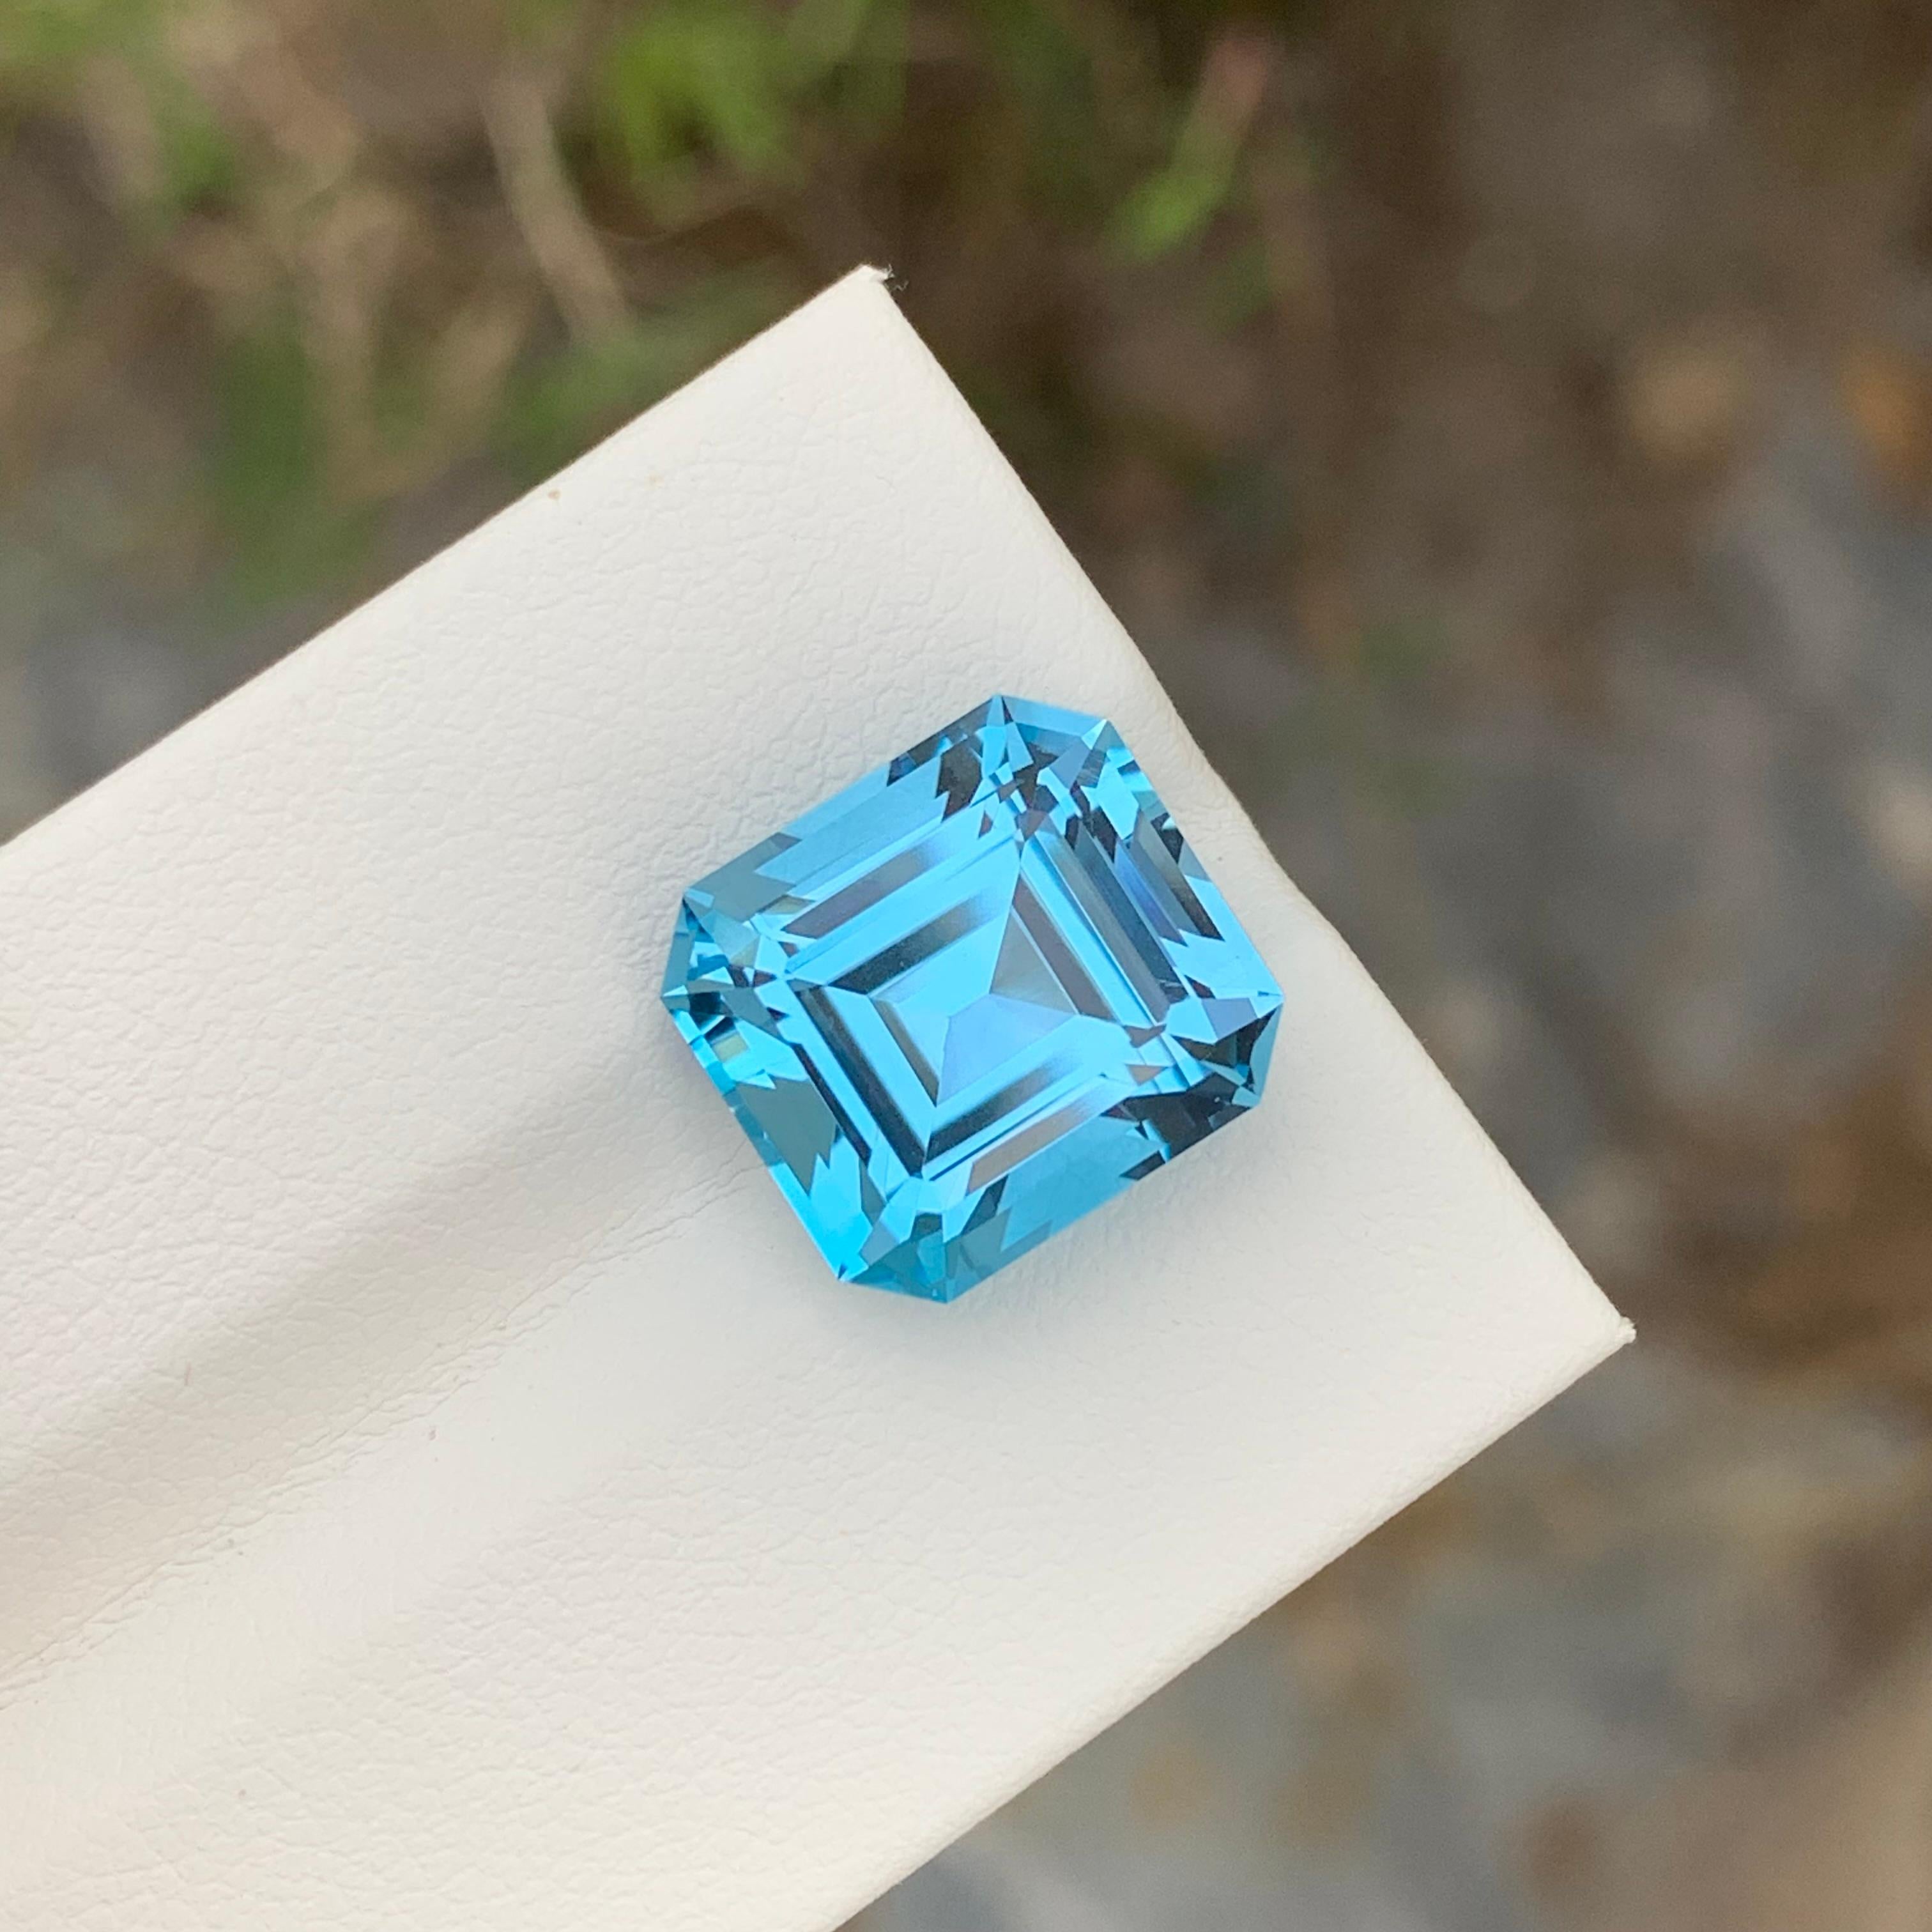 Loose Blue Topaz
Weight: 12.25 Carats
Dimensions: 13 x 12 x 8.9 Mm
Origin: Brazil
Shape: Asscher 
Color: Blue
Certificate: On Demand

Benefits Of Wearing Blue Topaz Stone:
It helps to improve communication and self-expression.
It provides inner